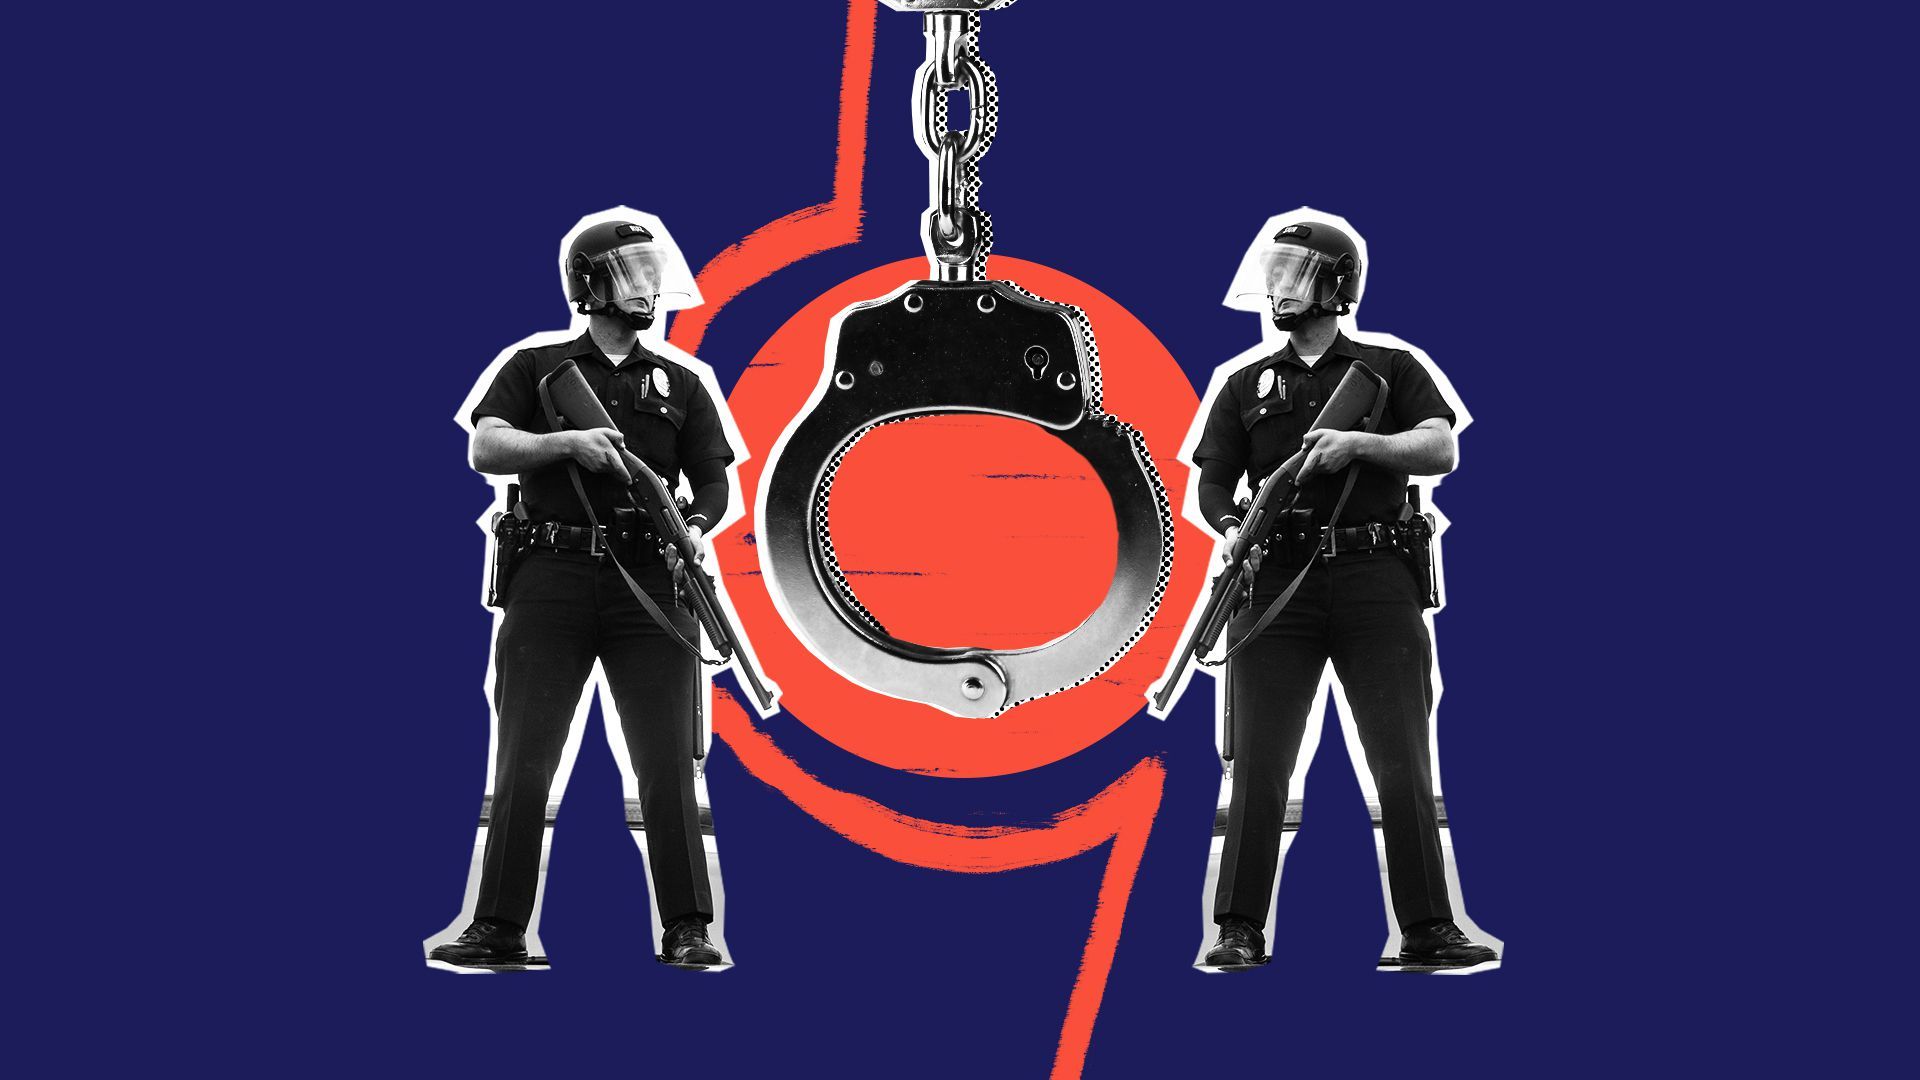 Photo illustration of handcuffs and two police officers.